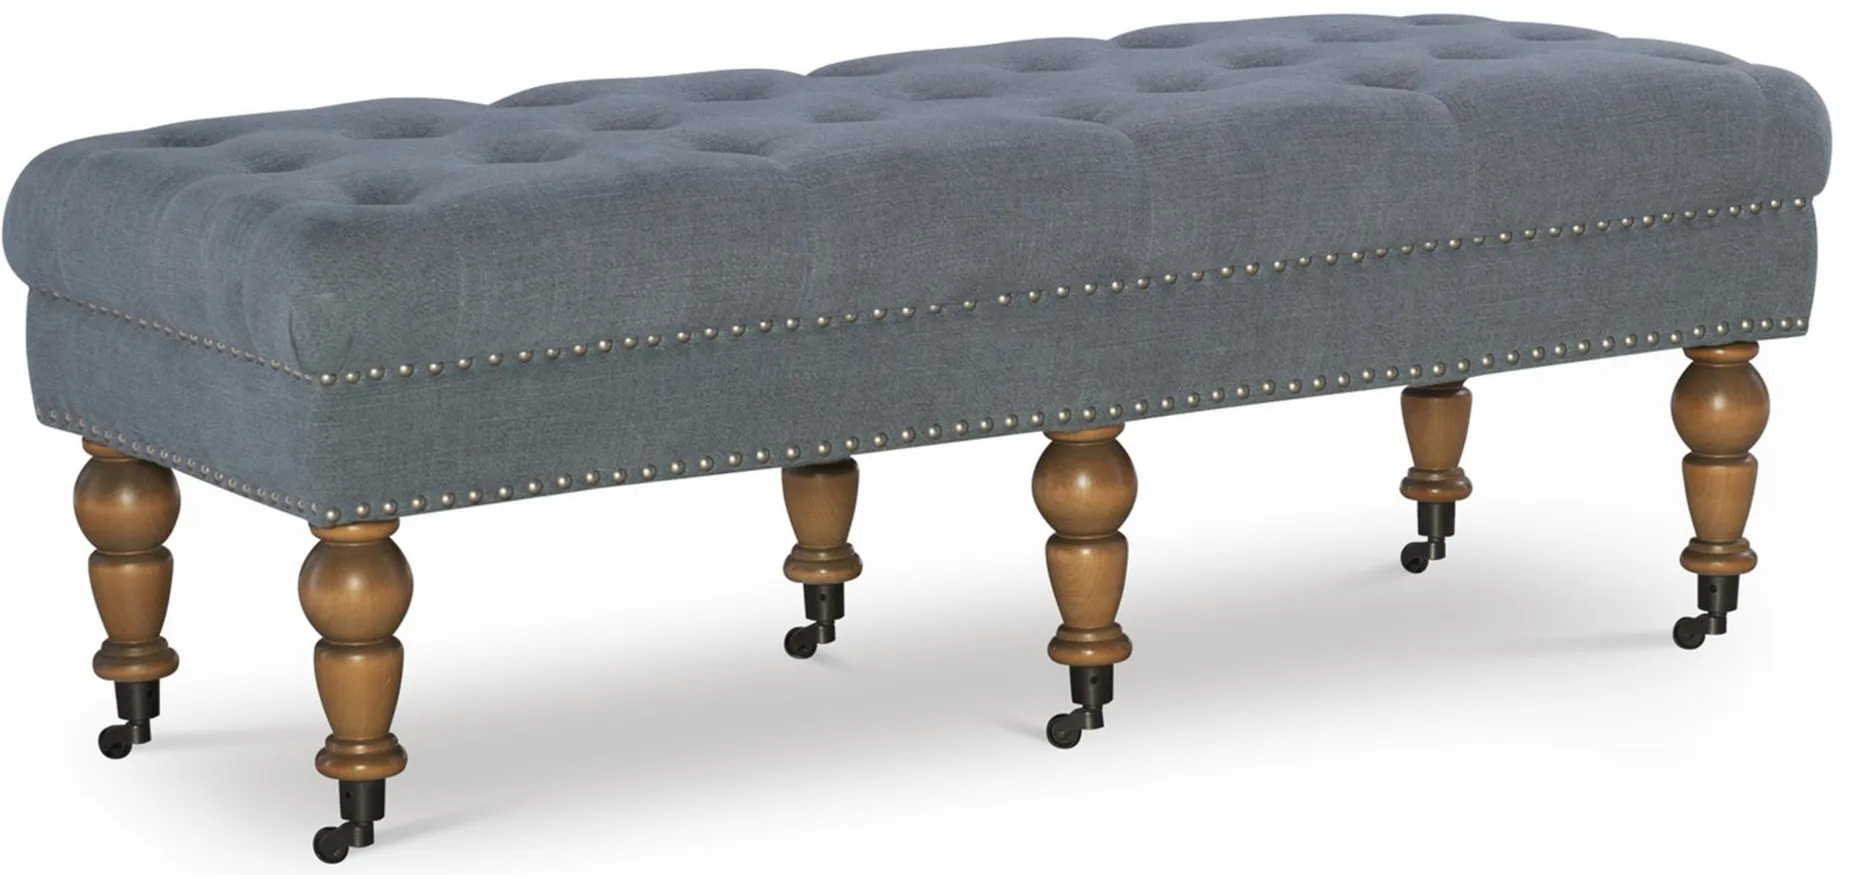 Isabelle Bench in Distressed Blue by Linon Home Decor